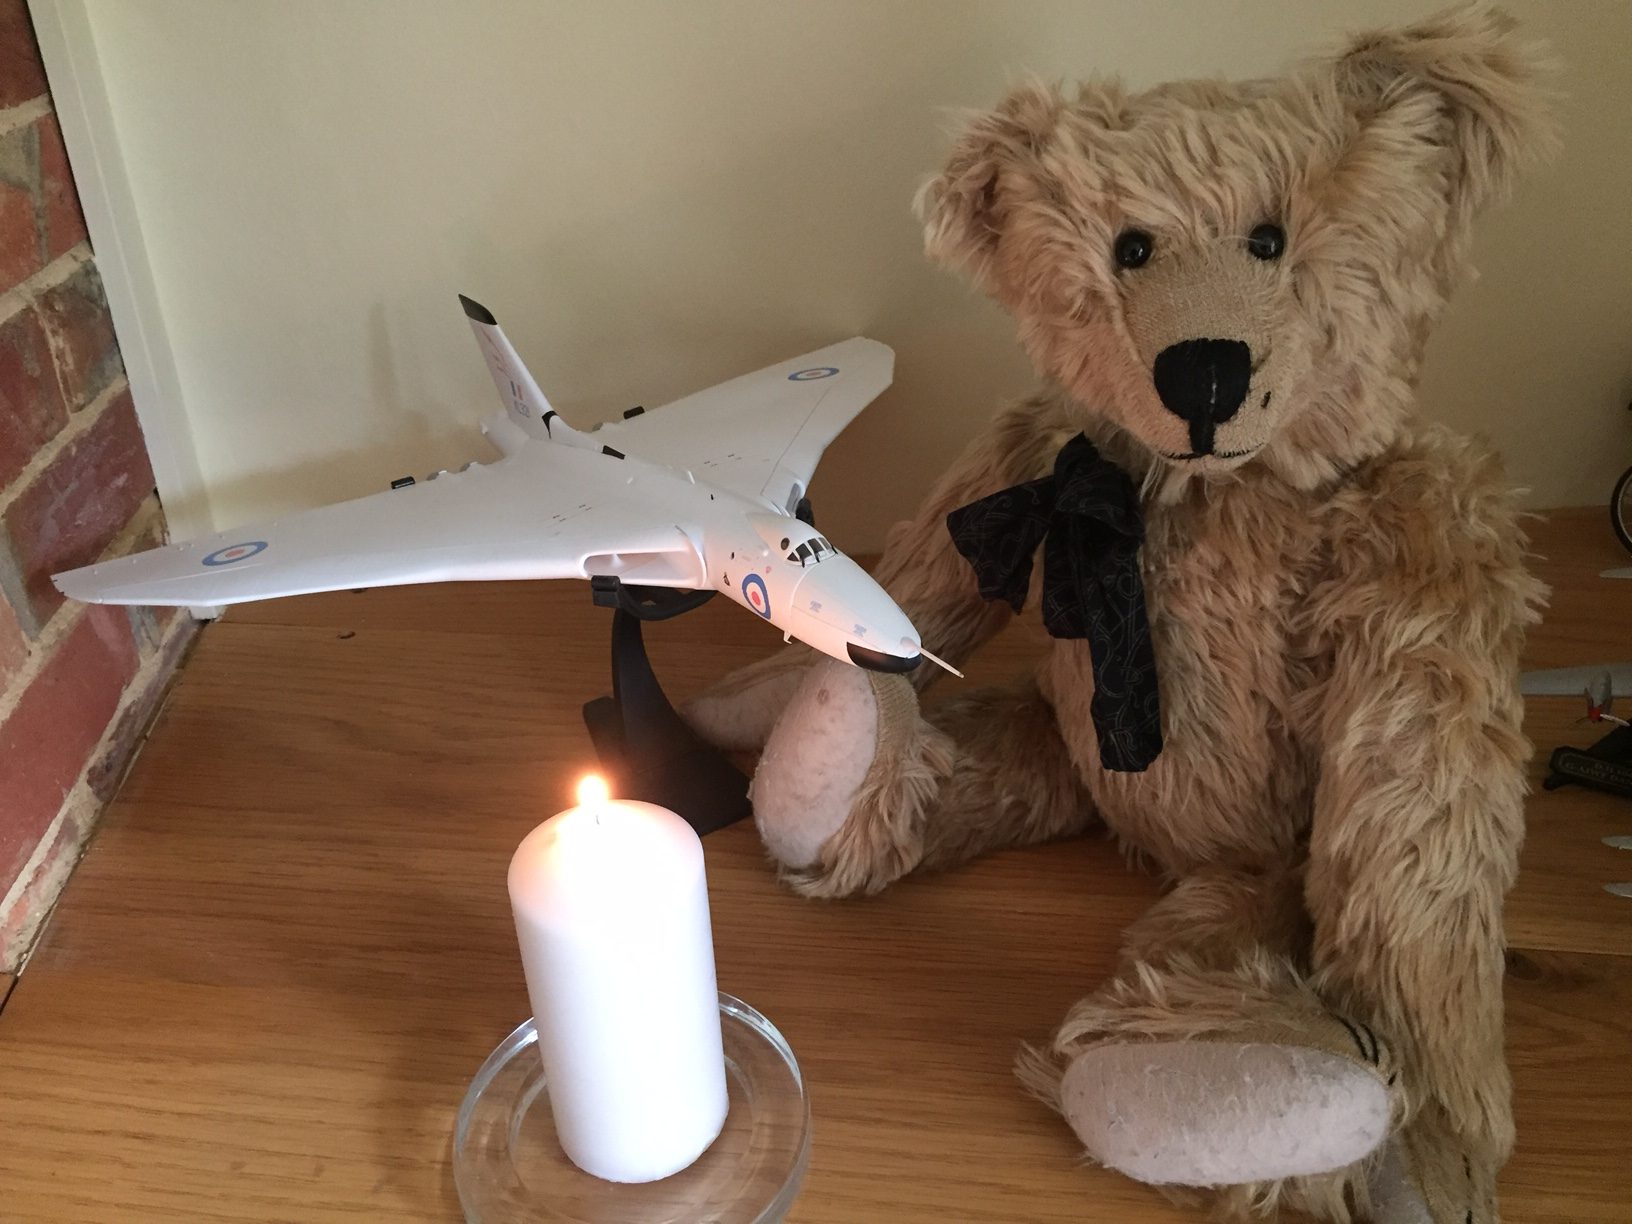 Lighting a Candle for Diddley: In memory of the Vulcan bomber that also ‘died’ in 2015. In the air that is…..